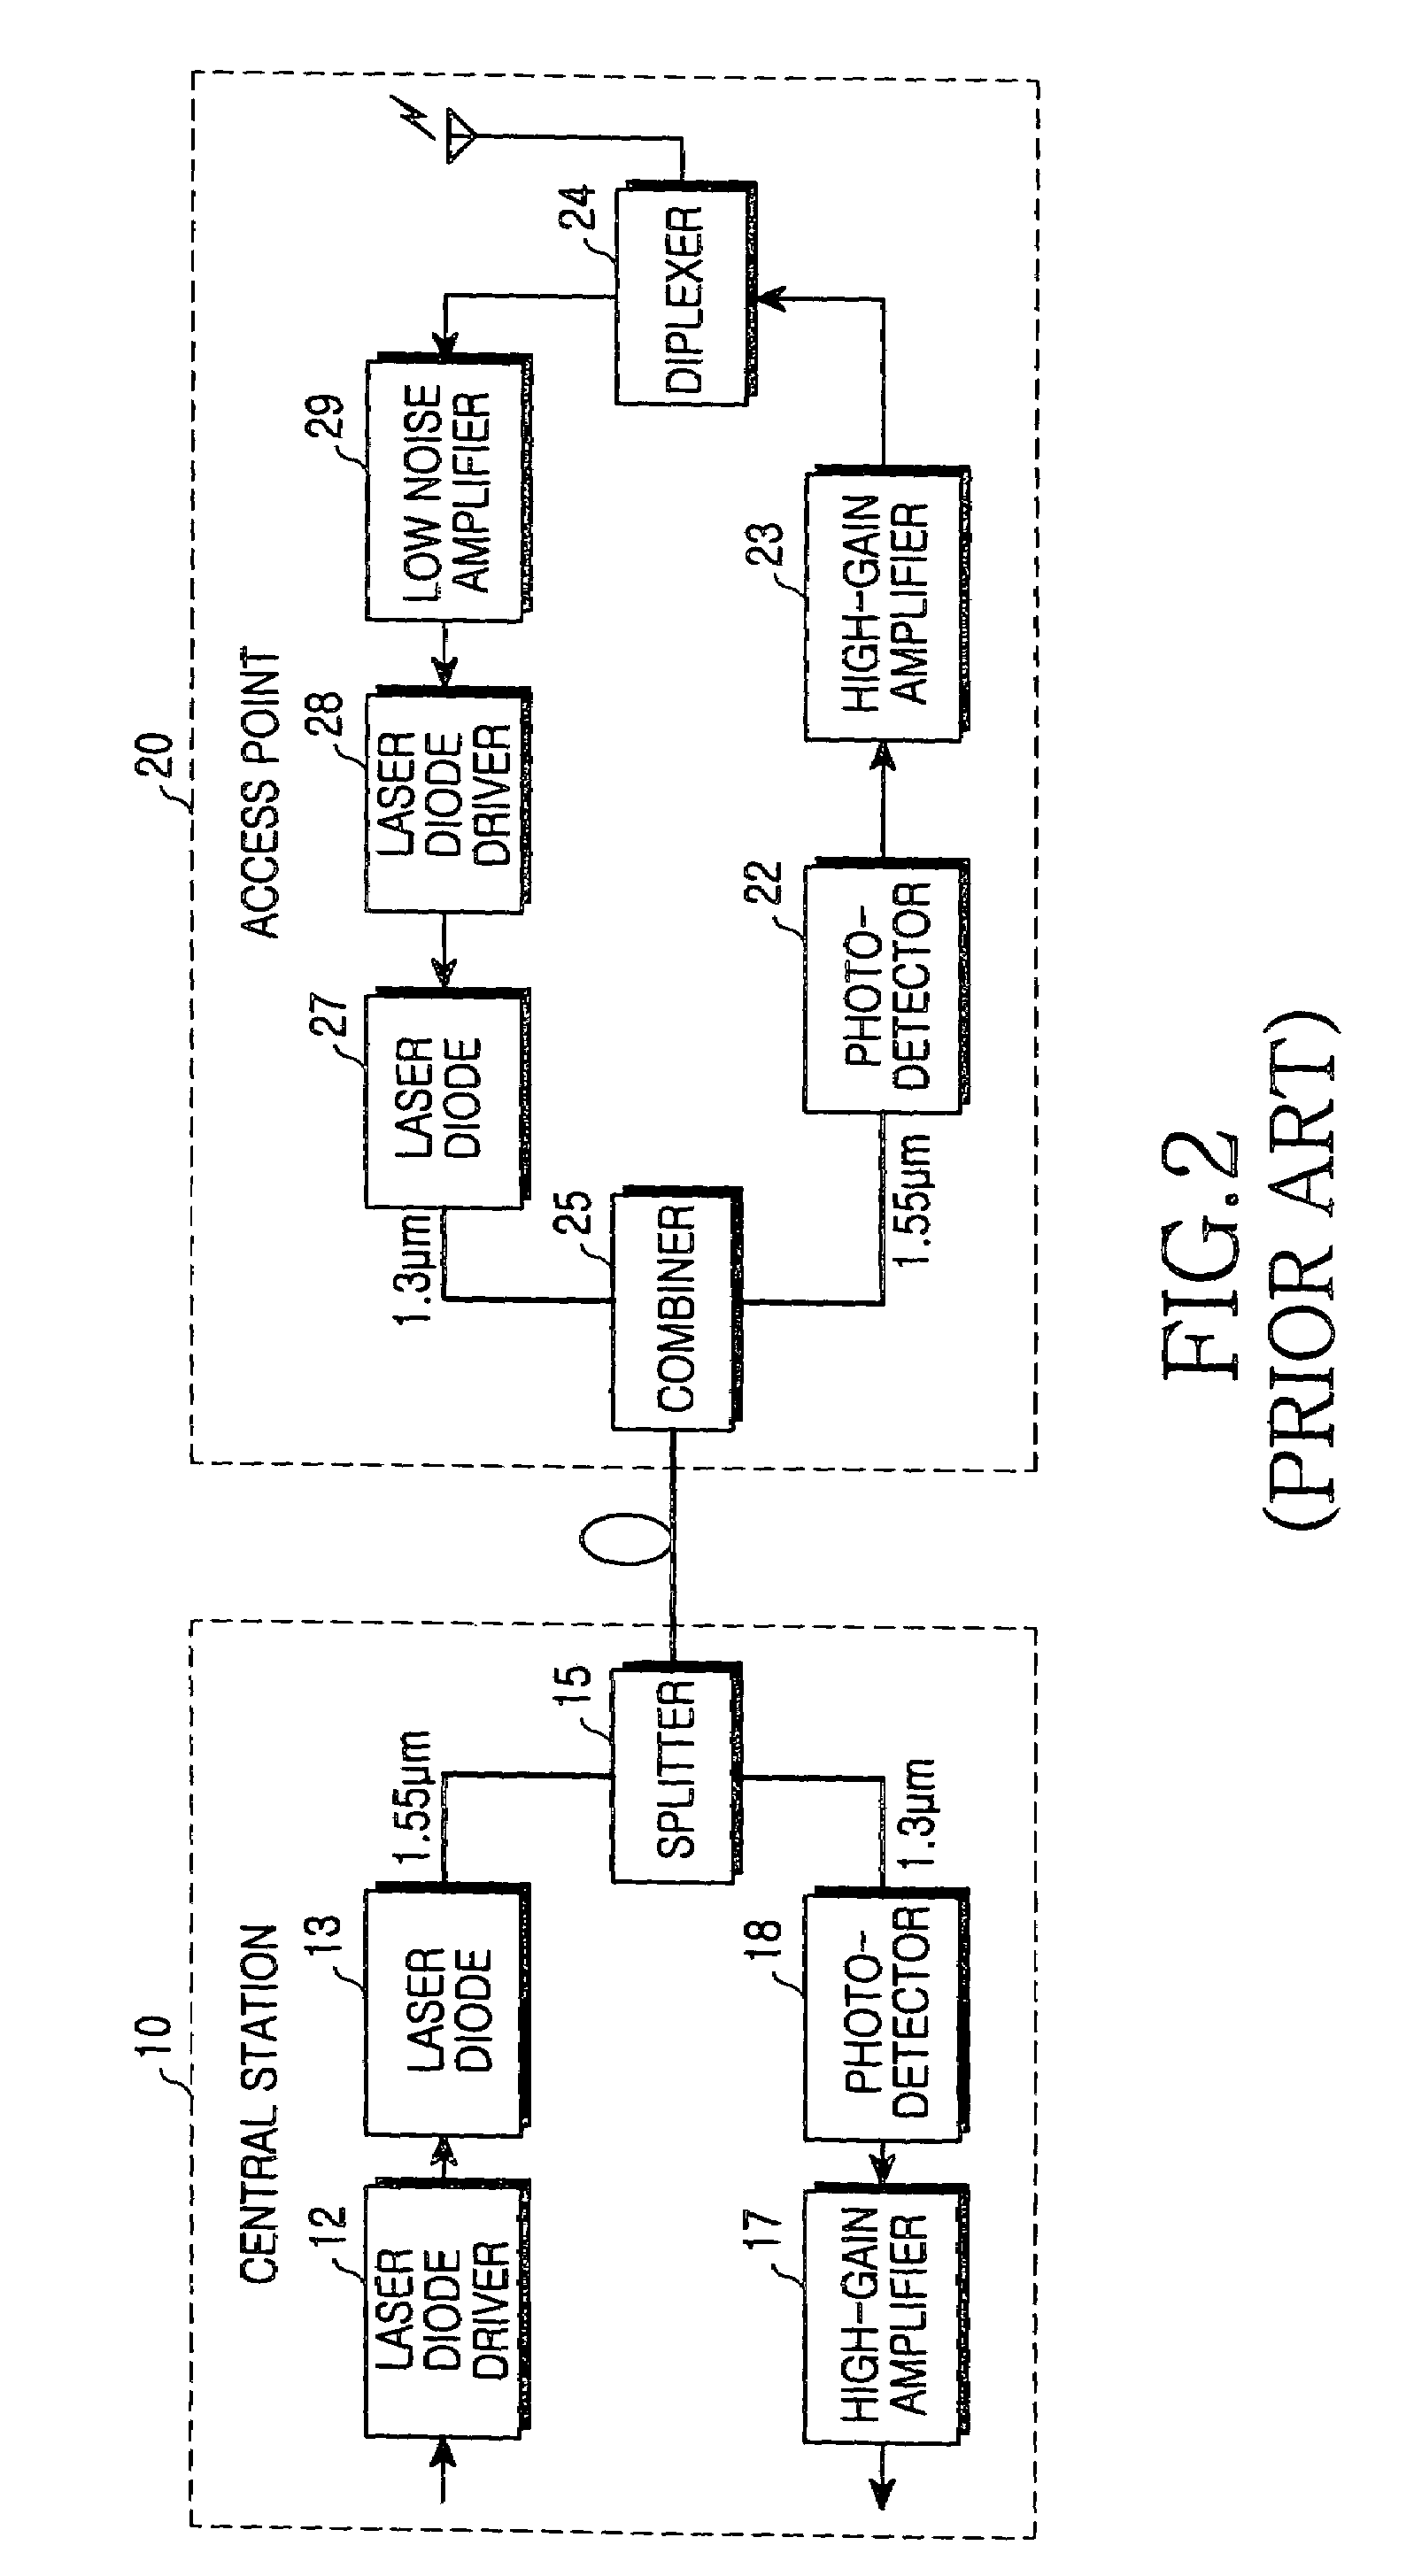 Access point for constructing optical fiber-based high-speed wireless network system